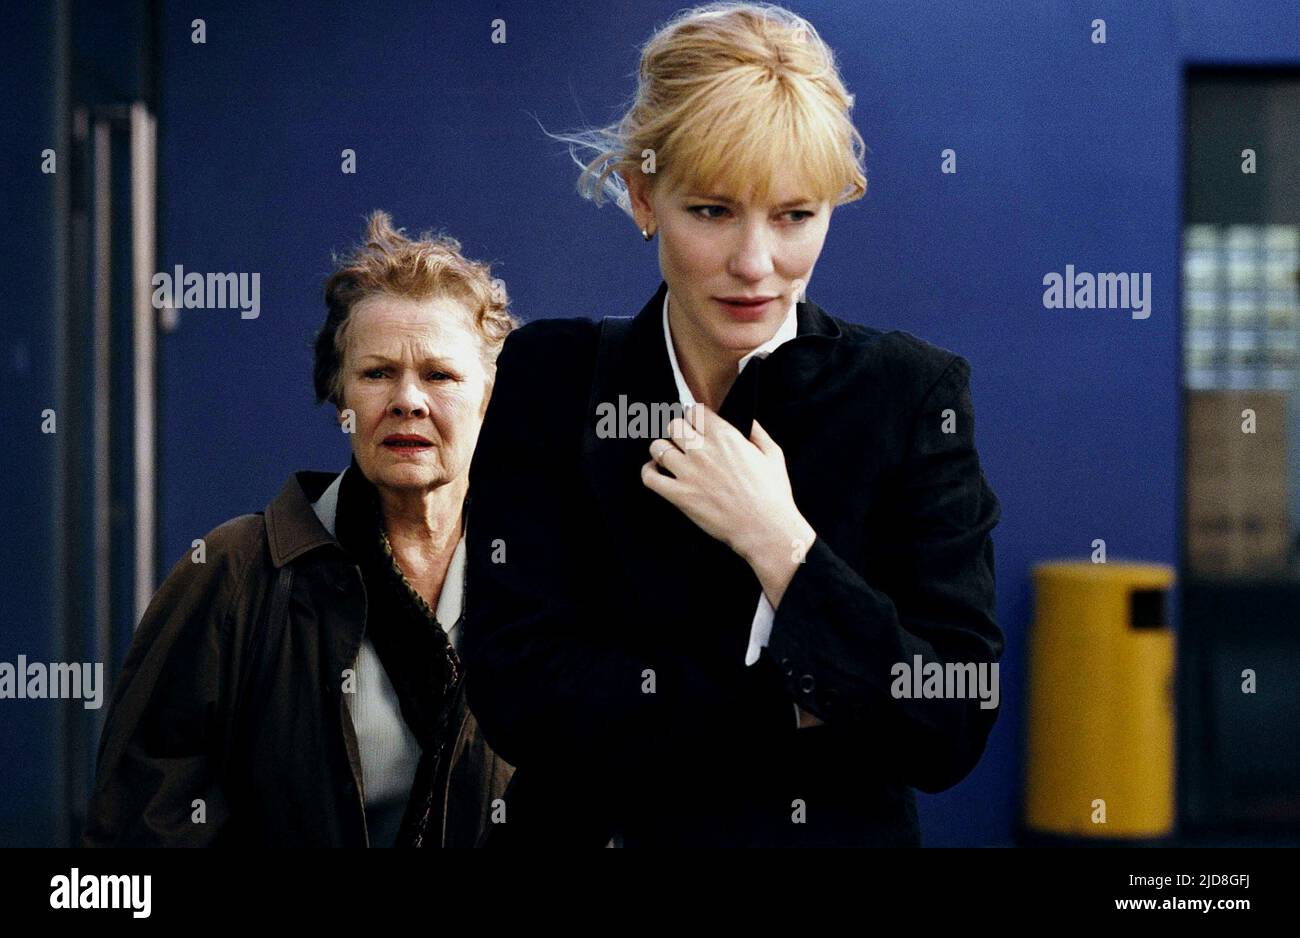 DENCH,BLANCHETT, NOTES ON A SCANDAL, 2006, Stock Photo